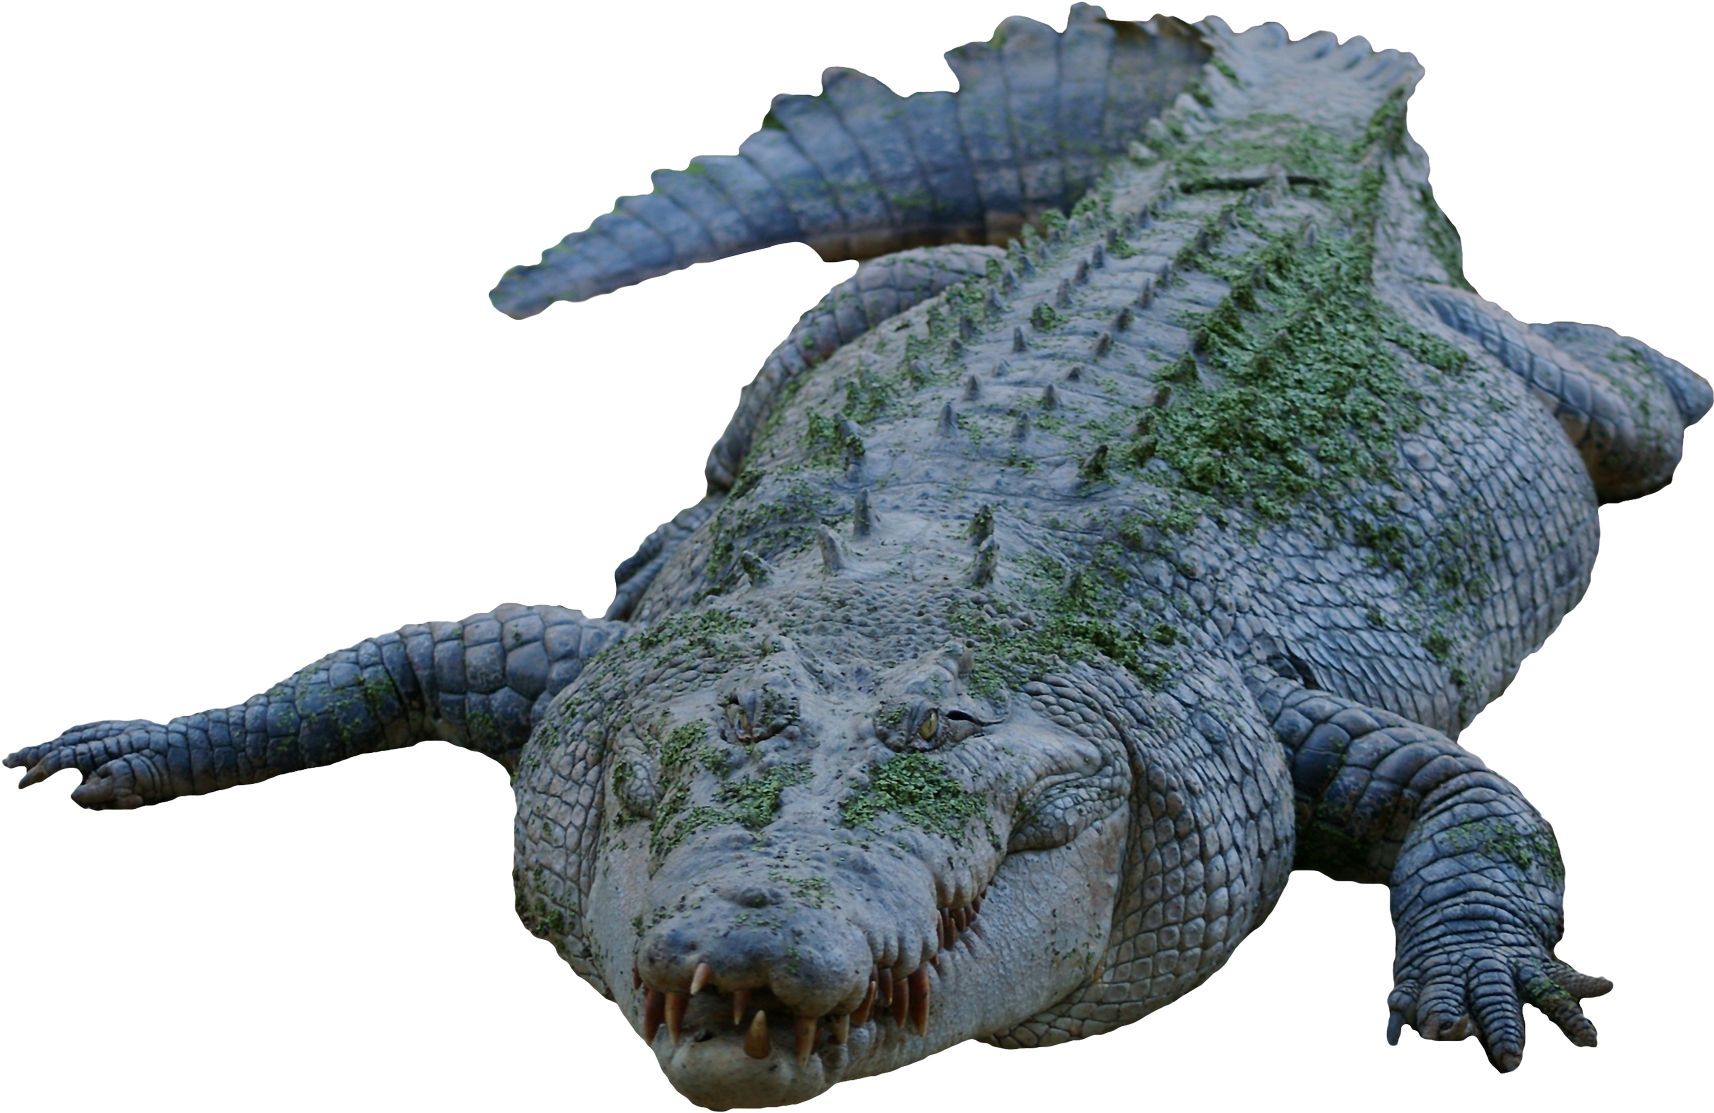 A Crocodile With Green Moss On It